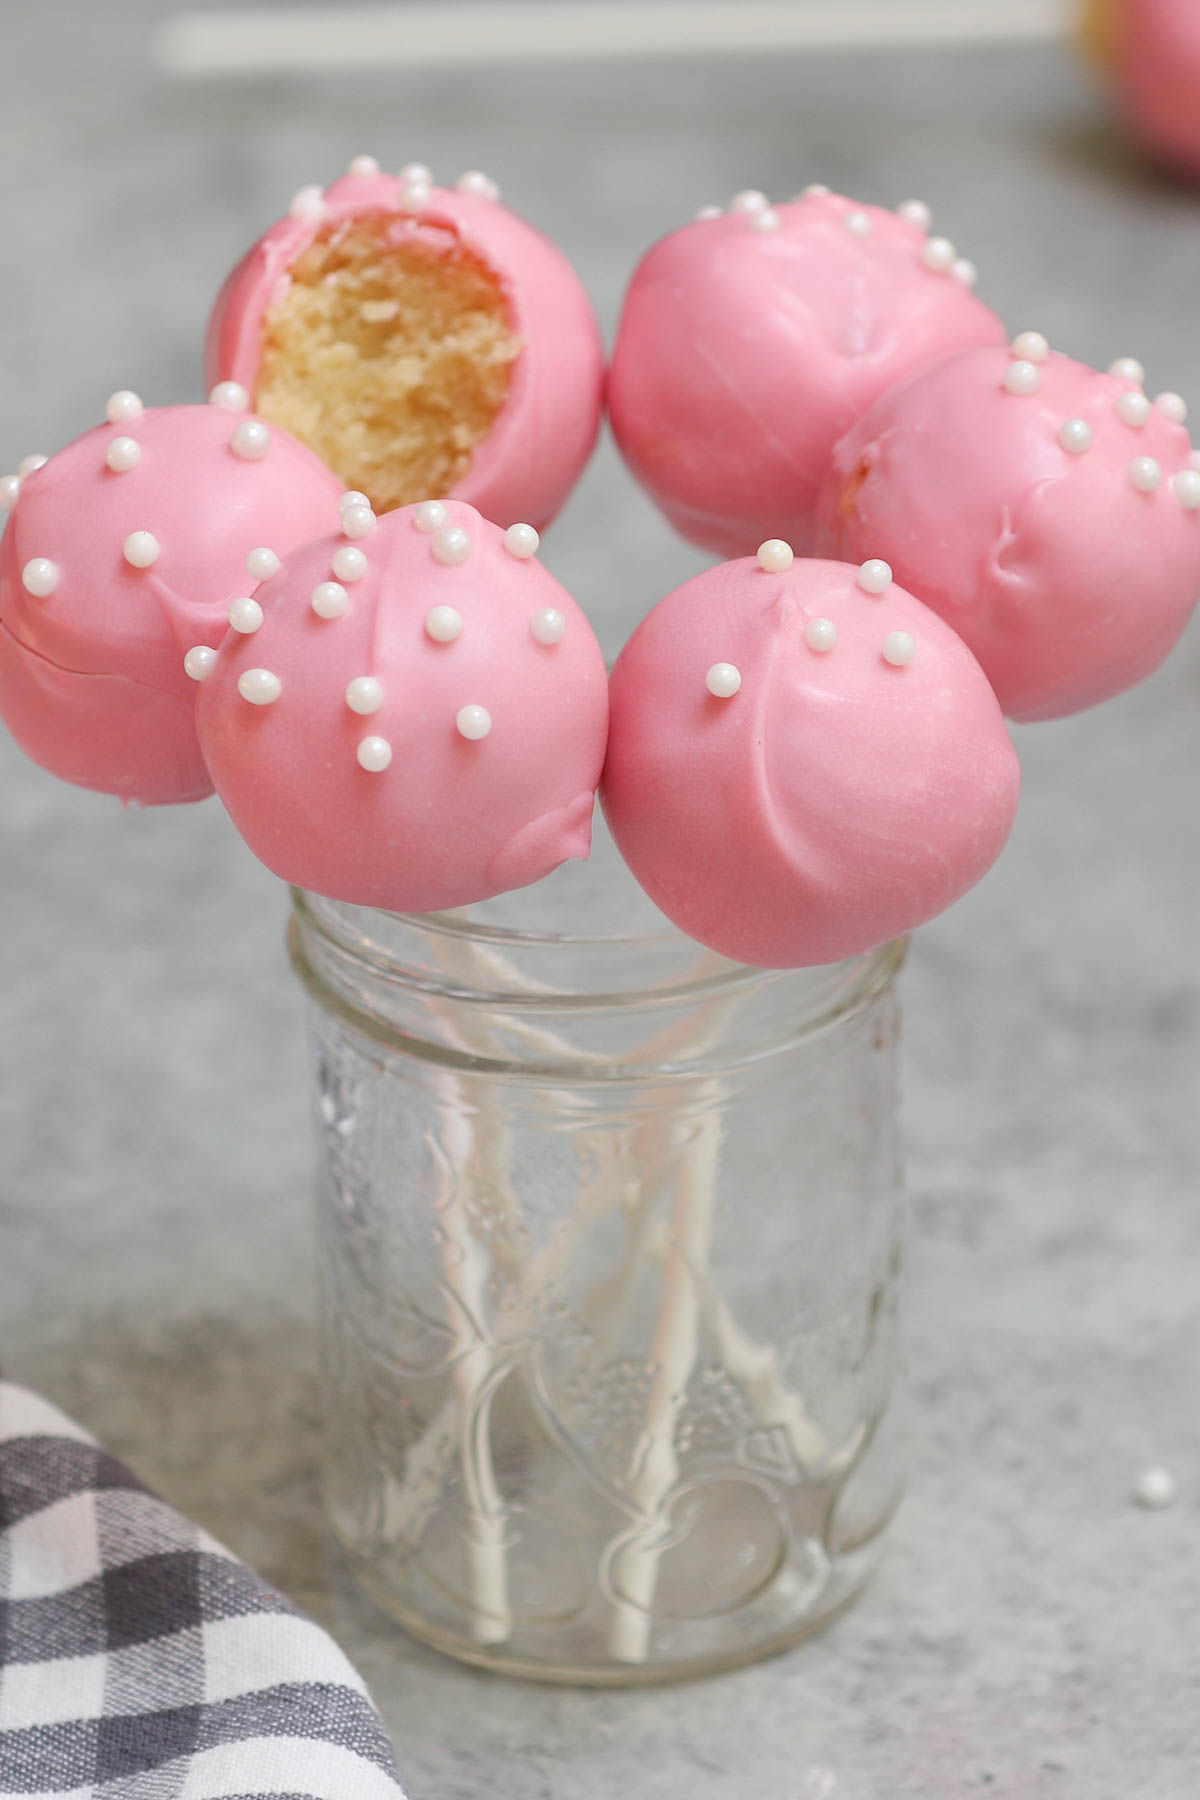 Cake pop is exactly what they sound like - a cross between cake and lollipops! These pink gifts are perfect for birthday parties. Although made very popular by coffee shop chains, these Starbucks Cake Pops can easily be recreated at home.